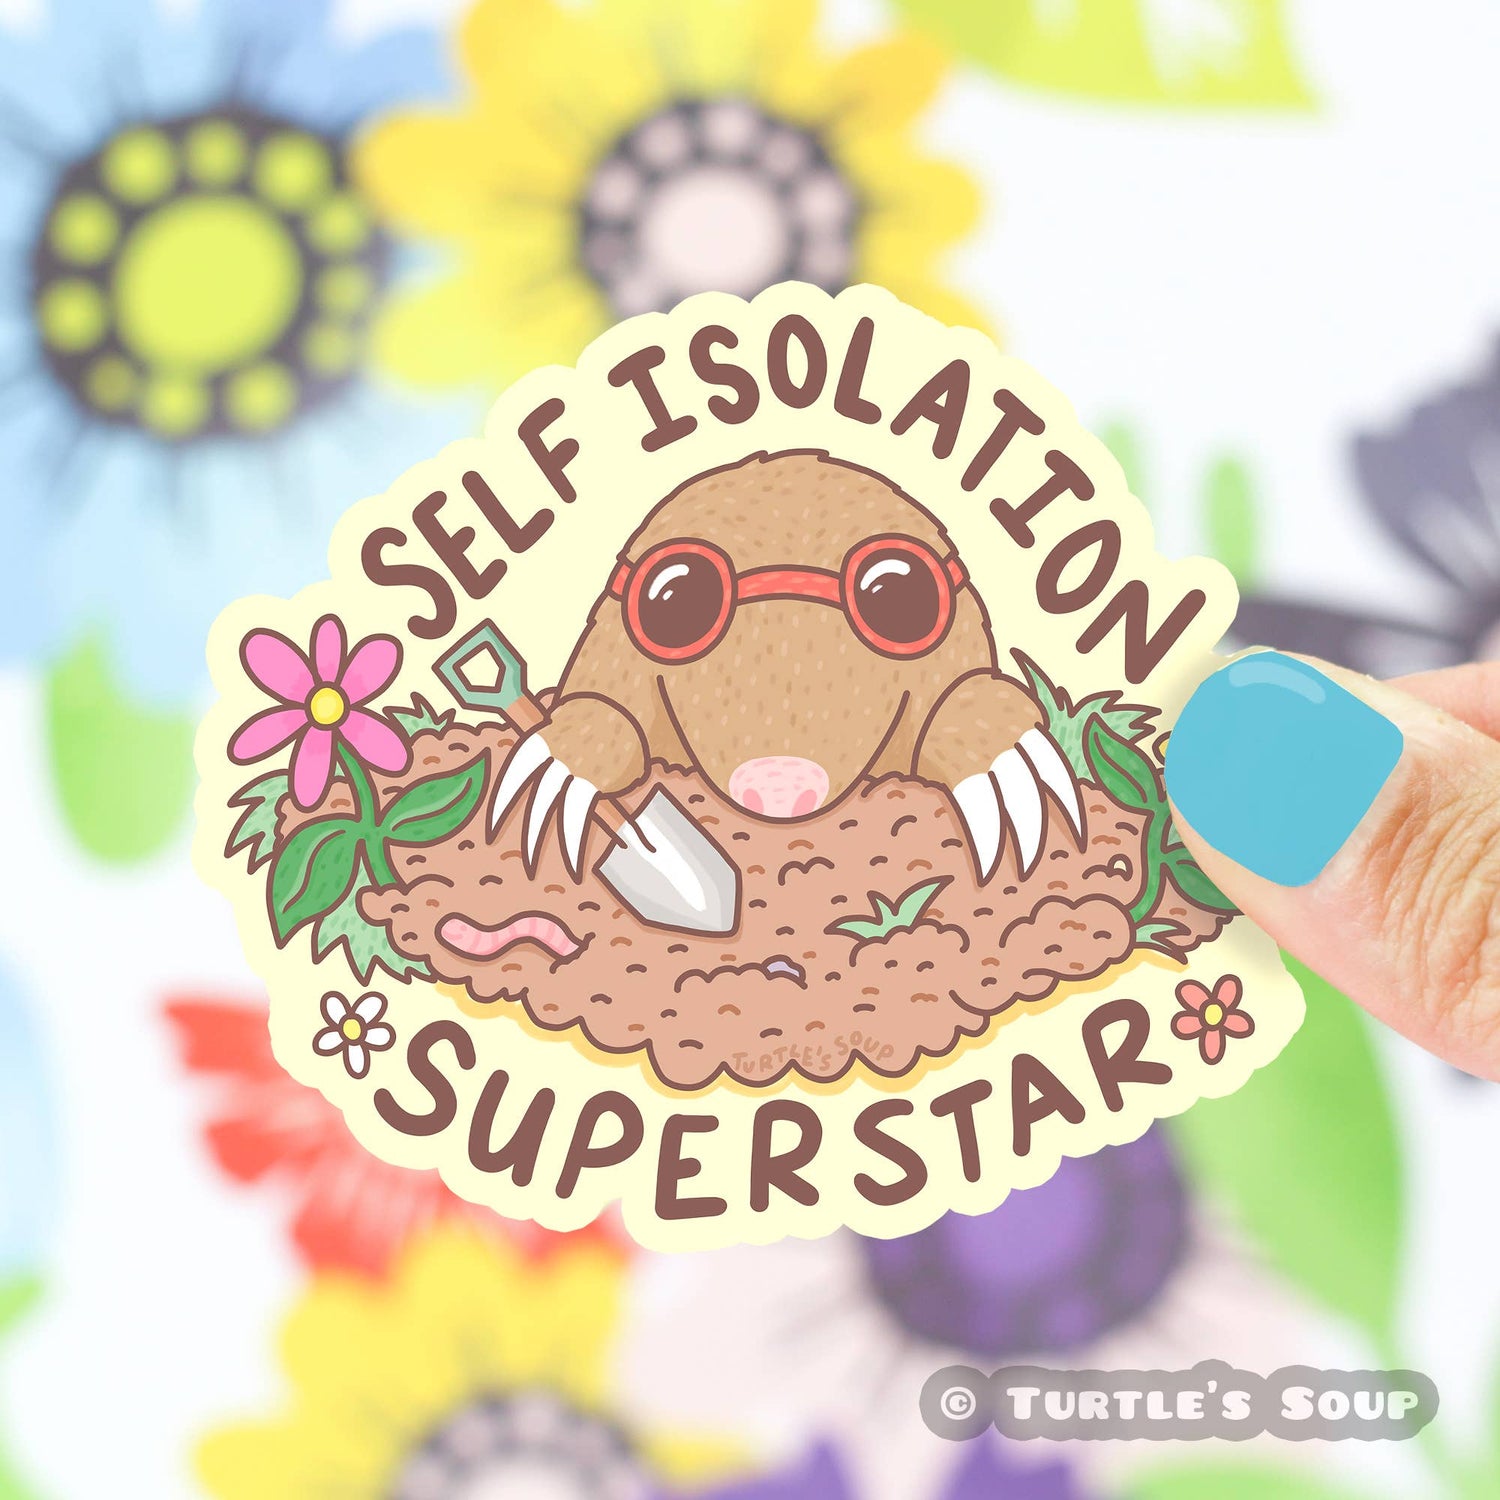 Mole in sunglasses "Self Isolation Superstar" sticker by Turtle's Soup